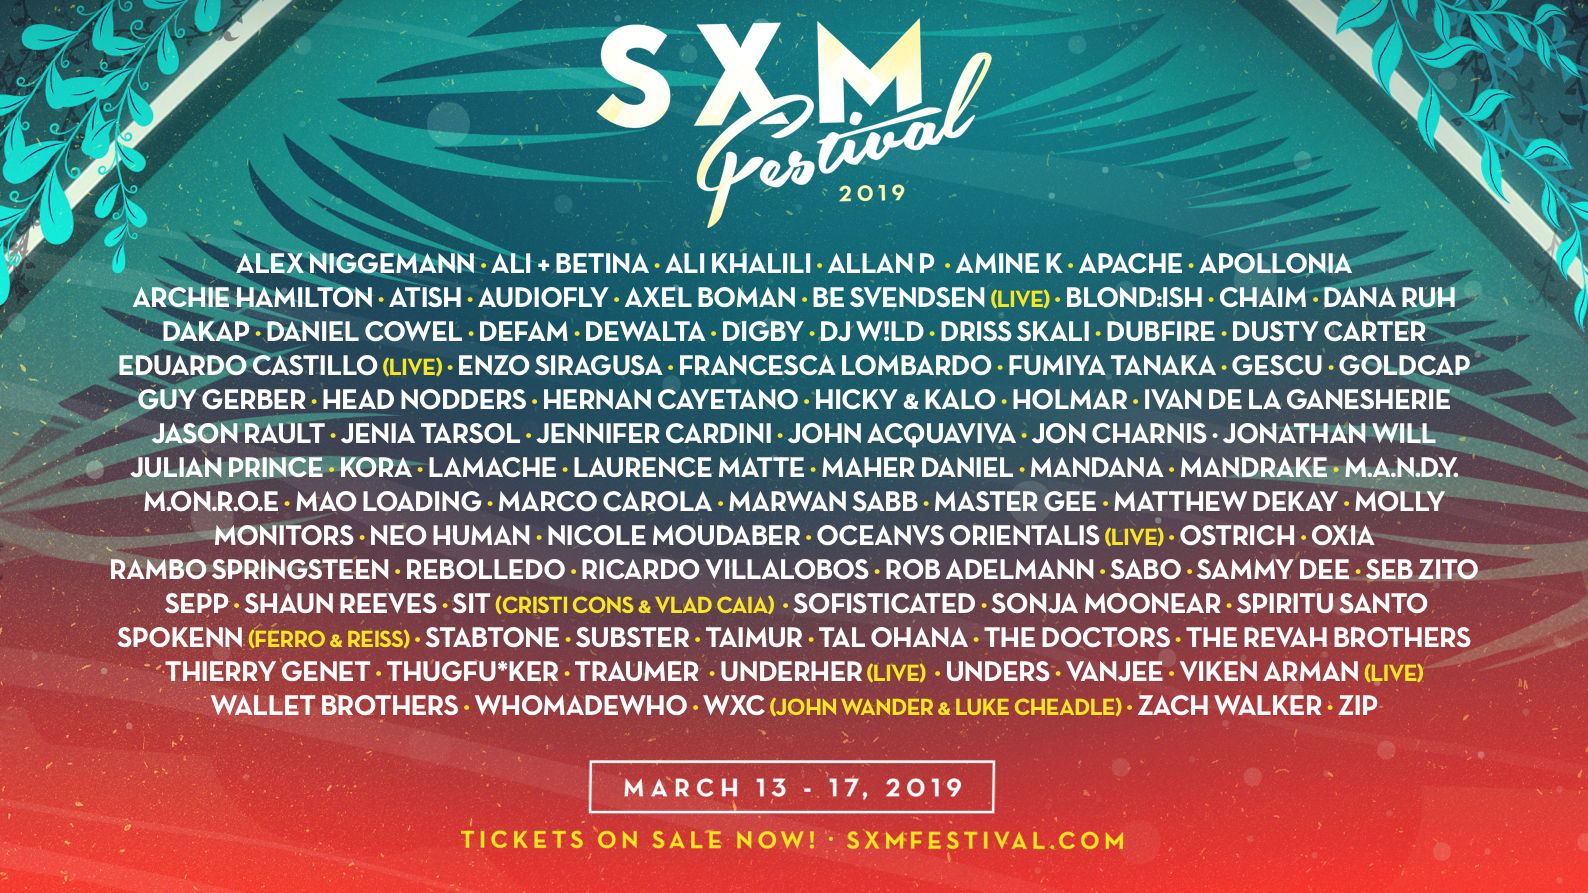 SXM Festival Reveals Showcase Partners, Complete Lineup, and Venues for the March 13-17 Event on the Caribbean Island of Saint Martin/Sint Maarten